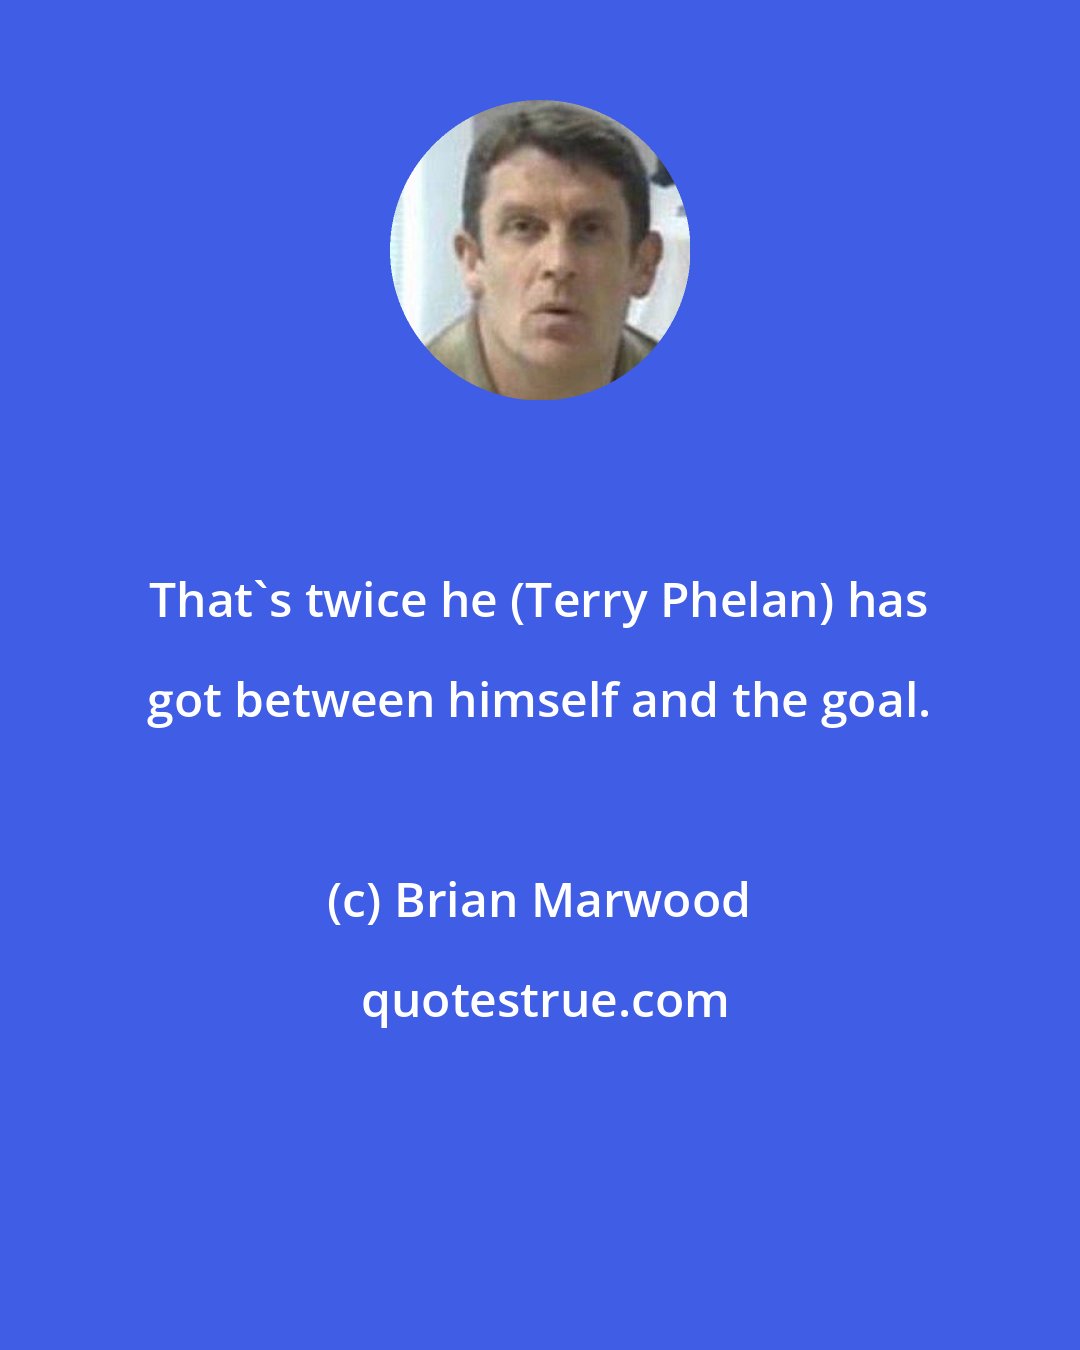 Brian Marwood: That's twice he (Terry Phelan) has got between himself and the goal.